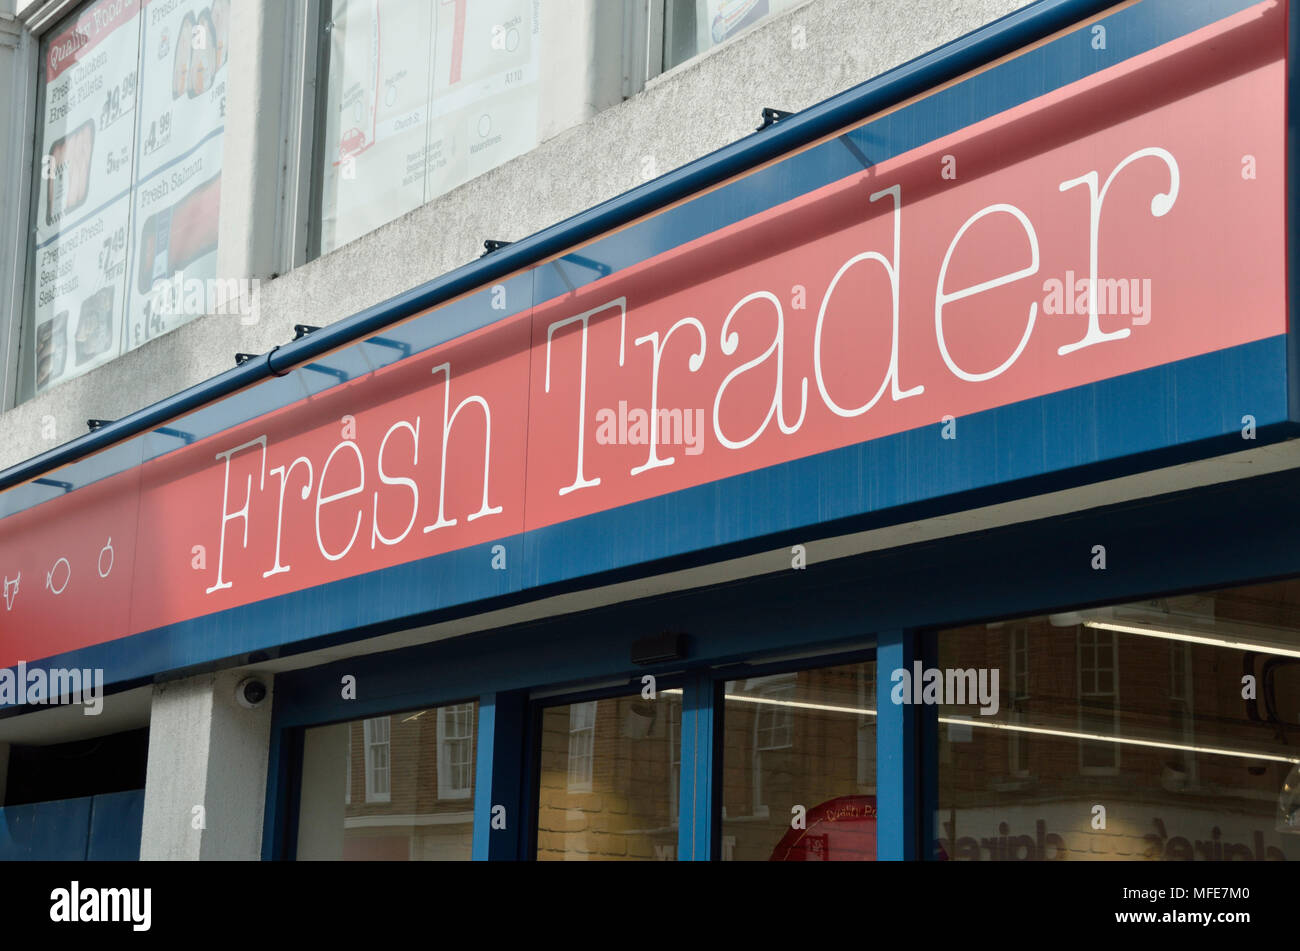 Frische Trader Cash and Carry in Enfield, London, UK. Stockfoto